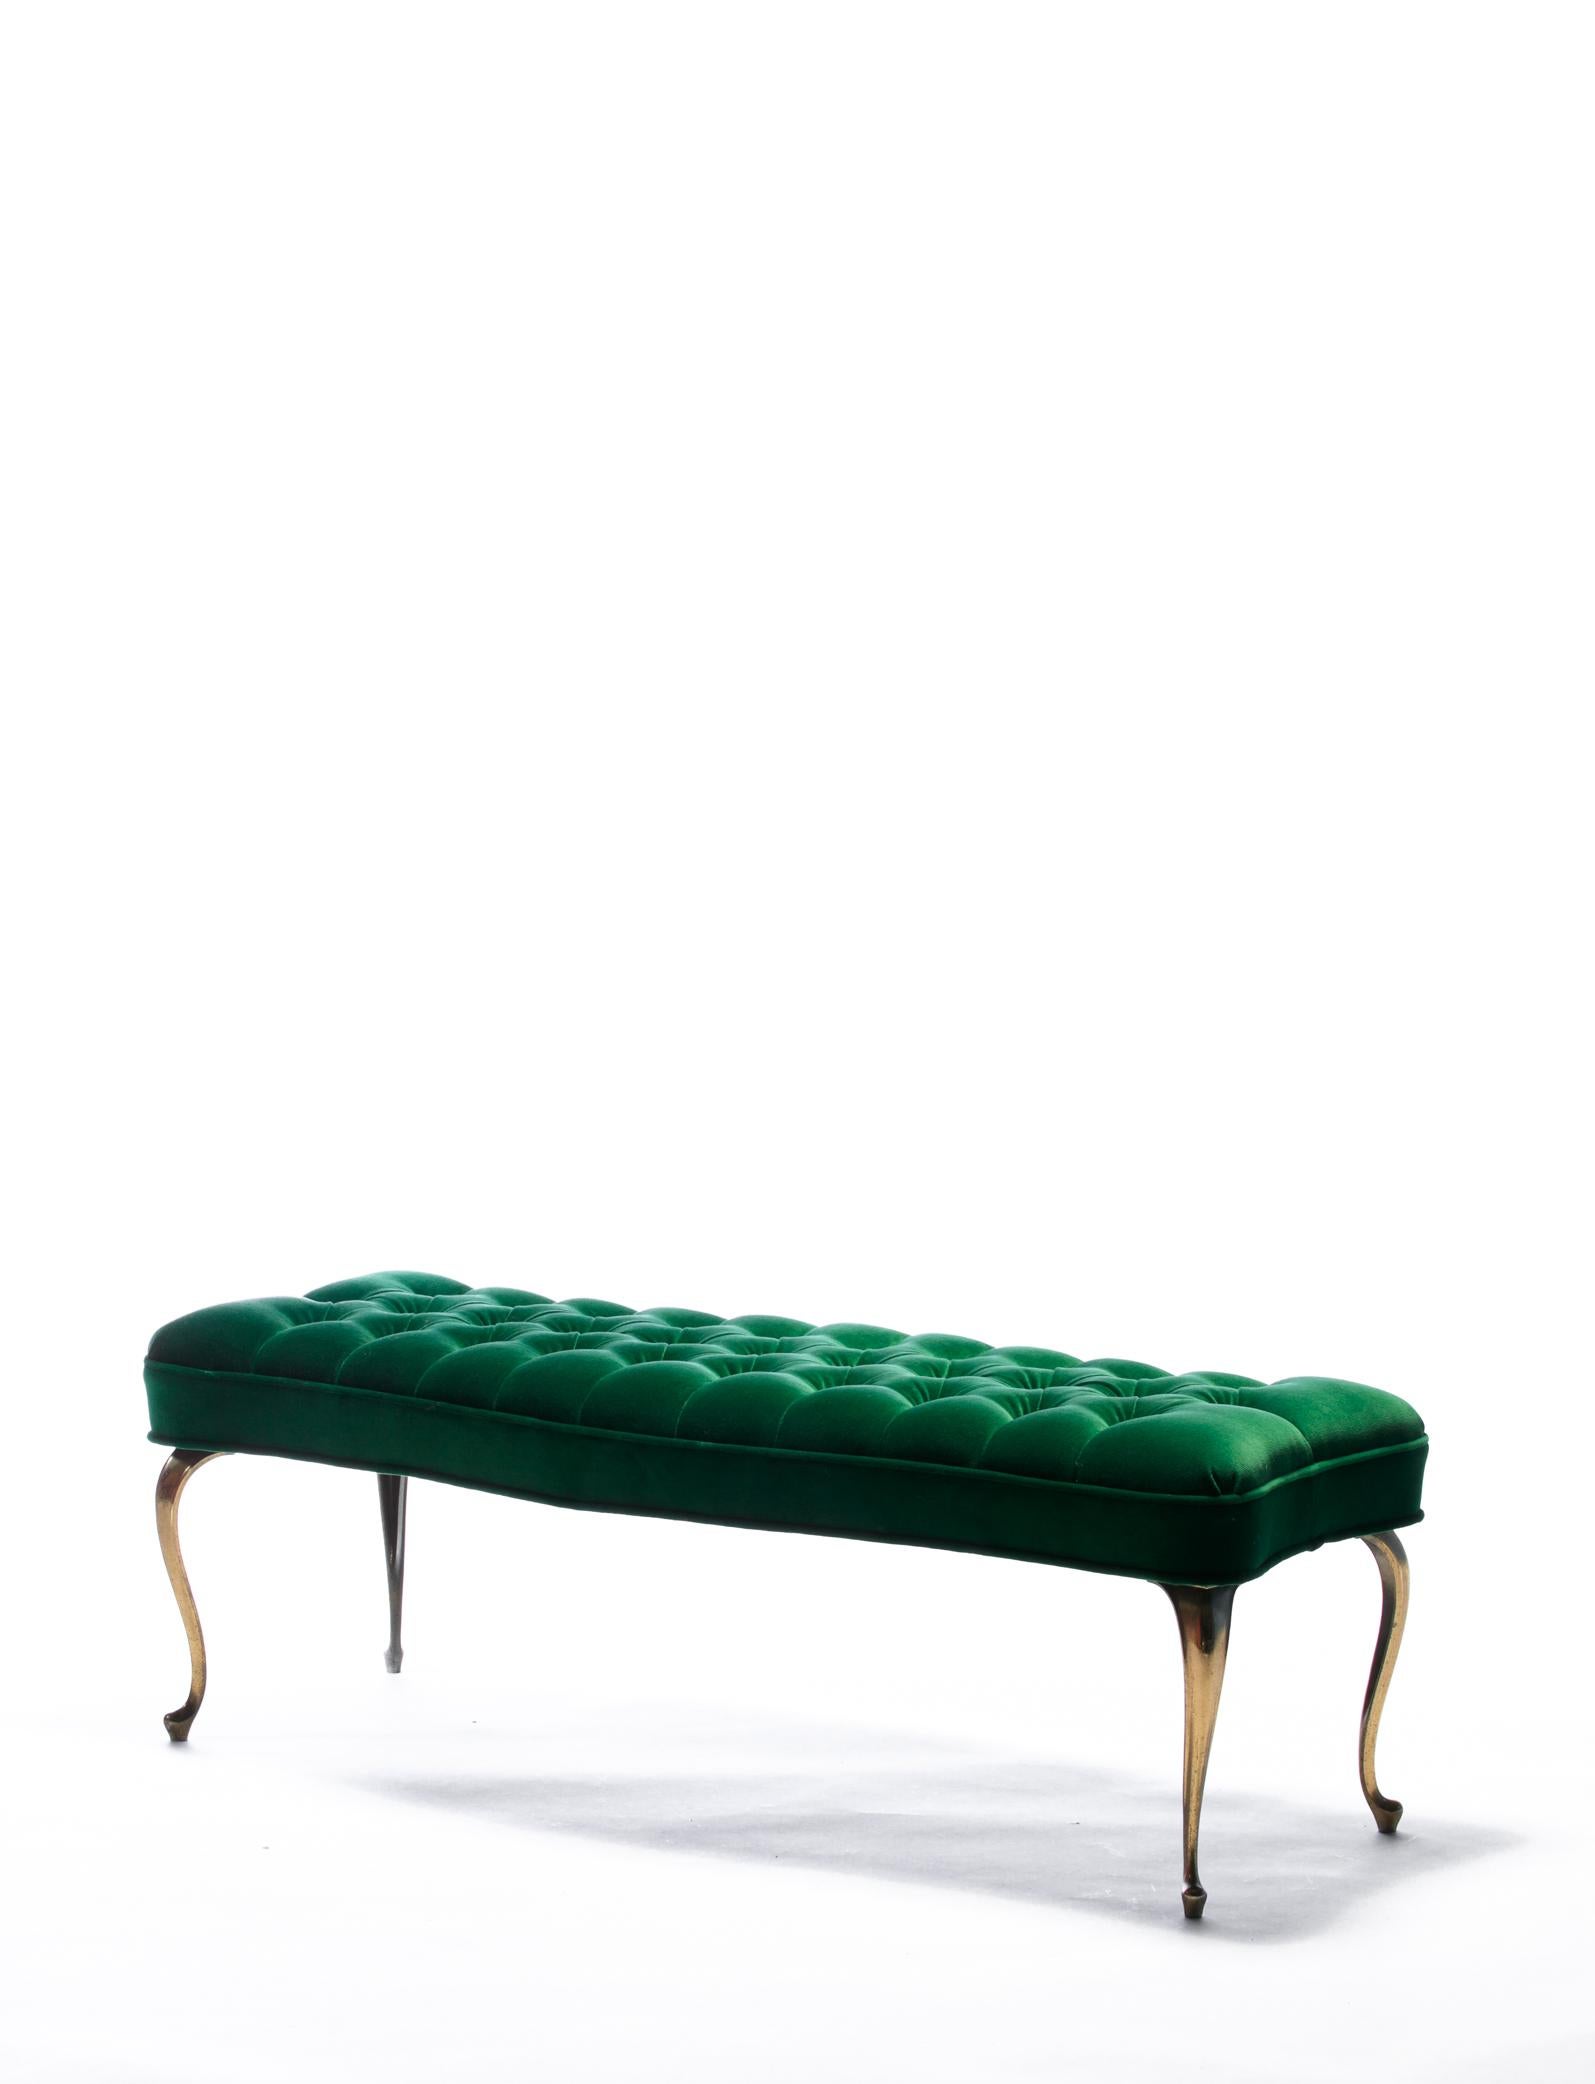 Vintage tufted seat beach with sexy splayed brass legs, newly upholstered in emerald green velvet upholstery. An elegant and stylish bench in the glamorous Hollywood Regency style. This bench would be well suited for a fabulous foyer or at the end